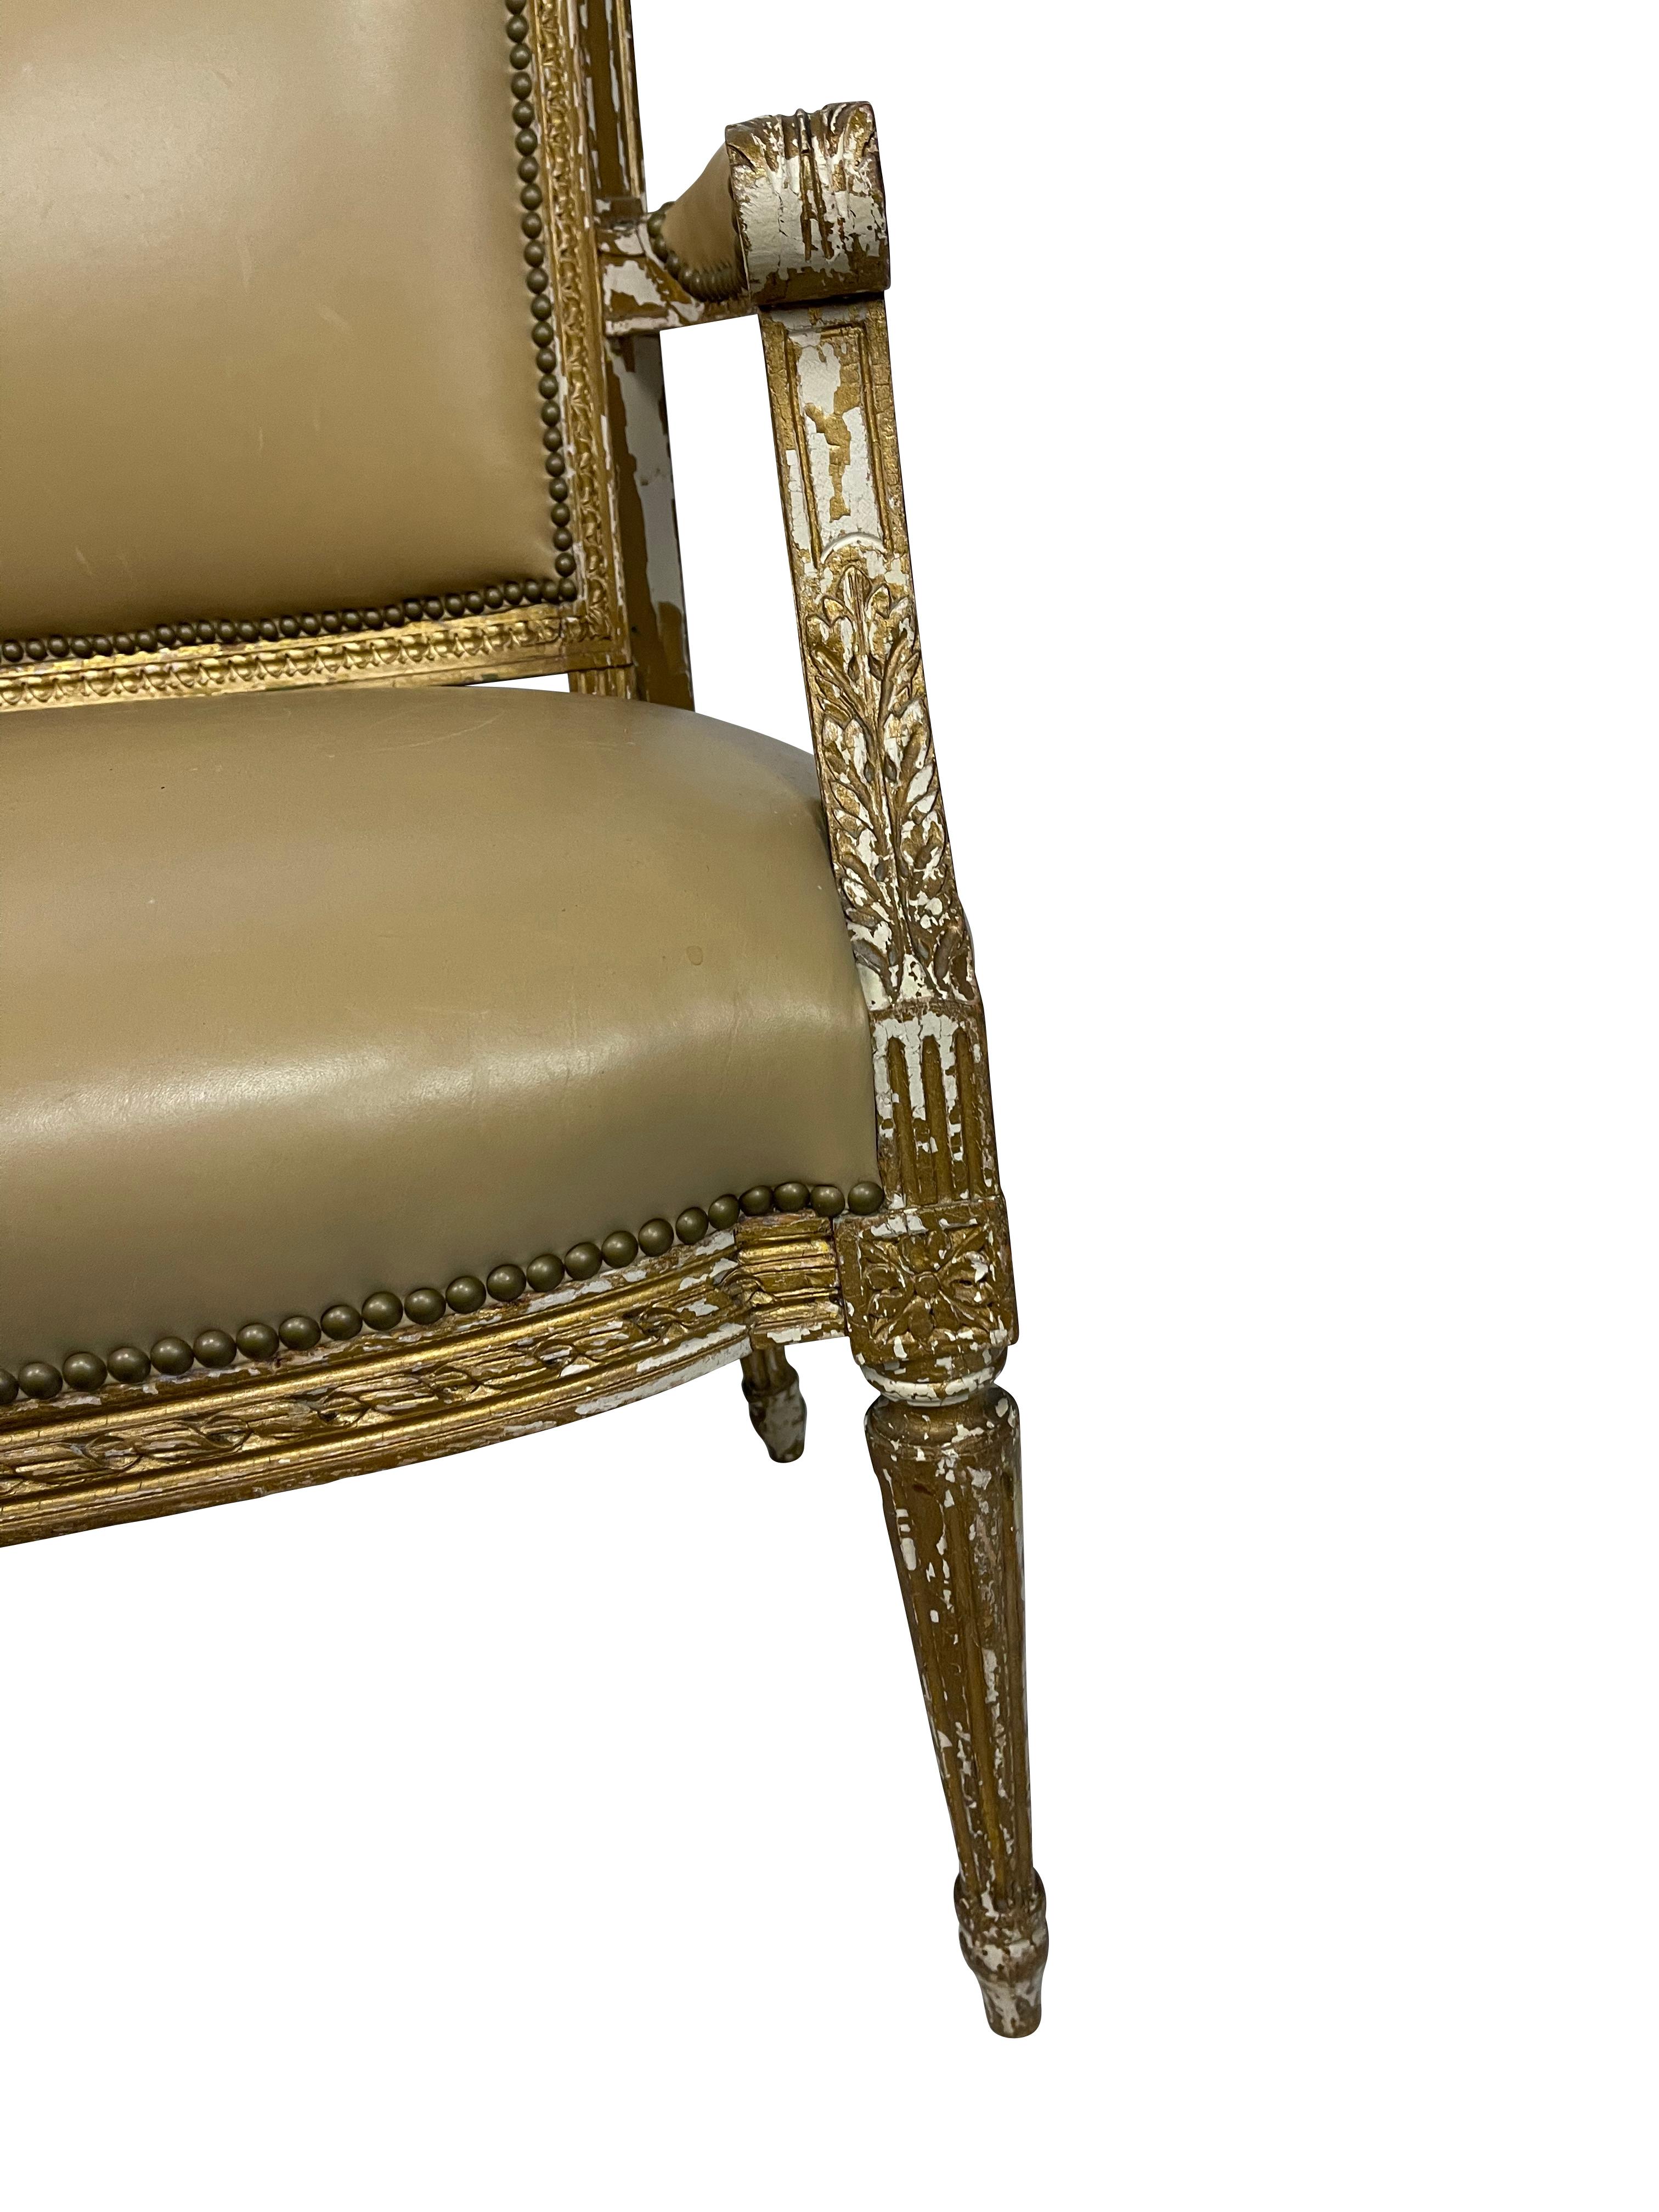 19th Century Italian Diminutive Painted Settee in Tan Leather For Sale 3